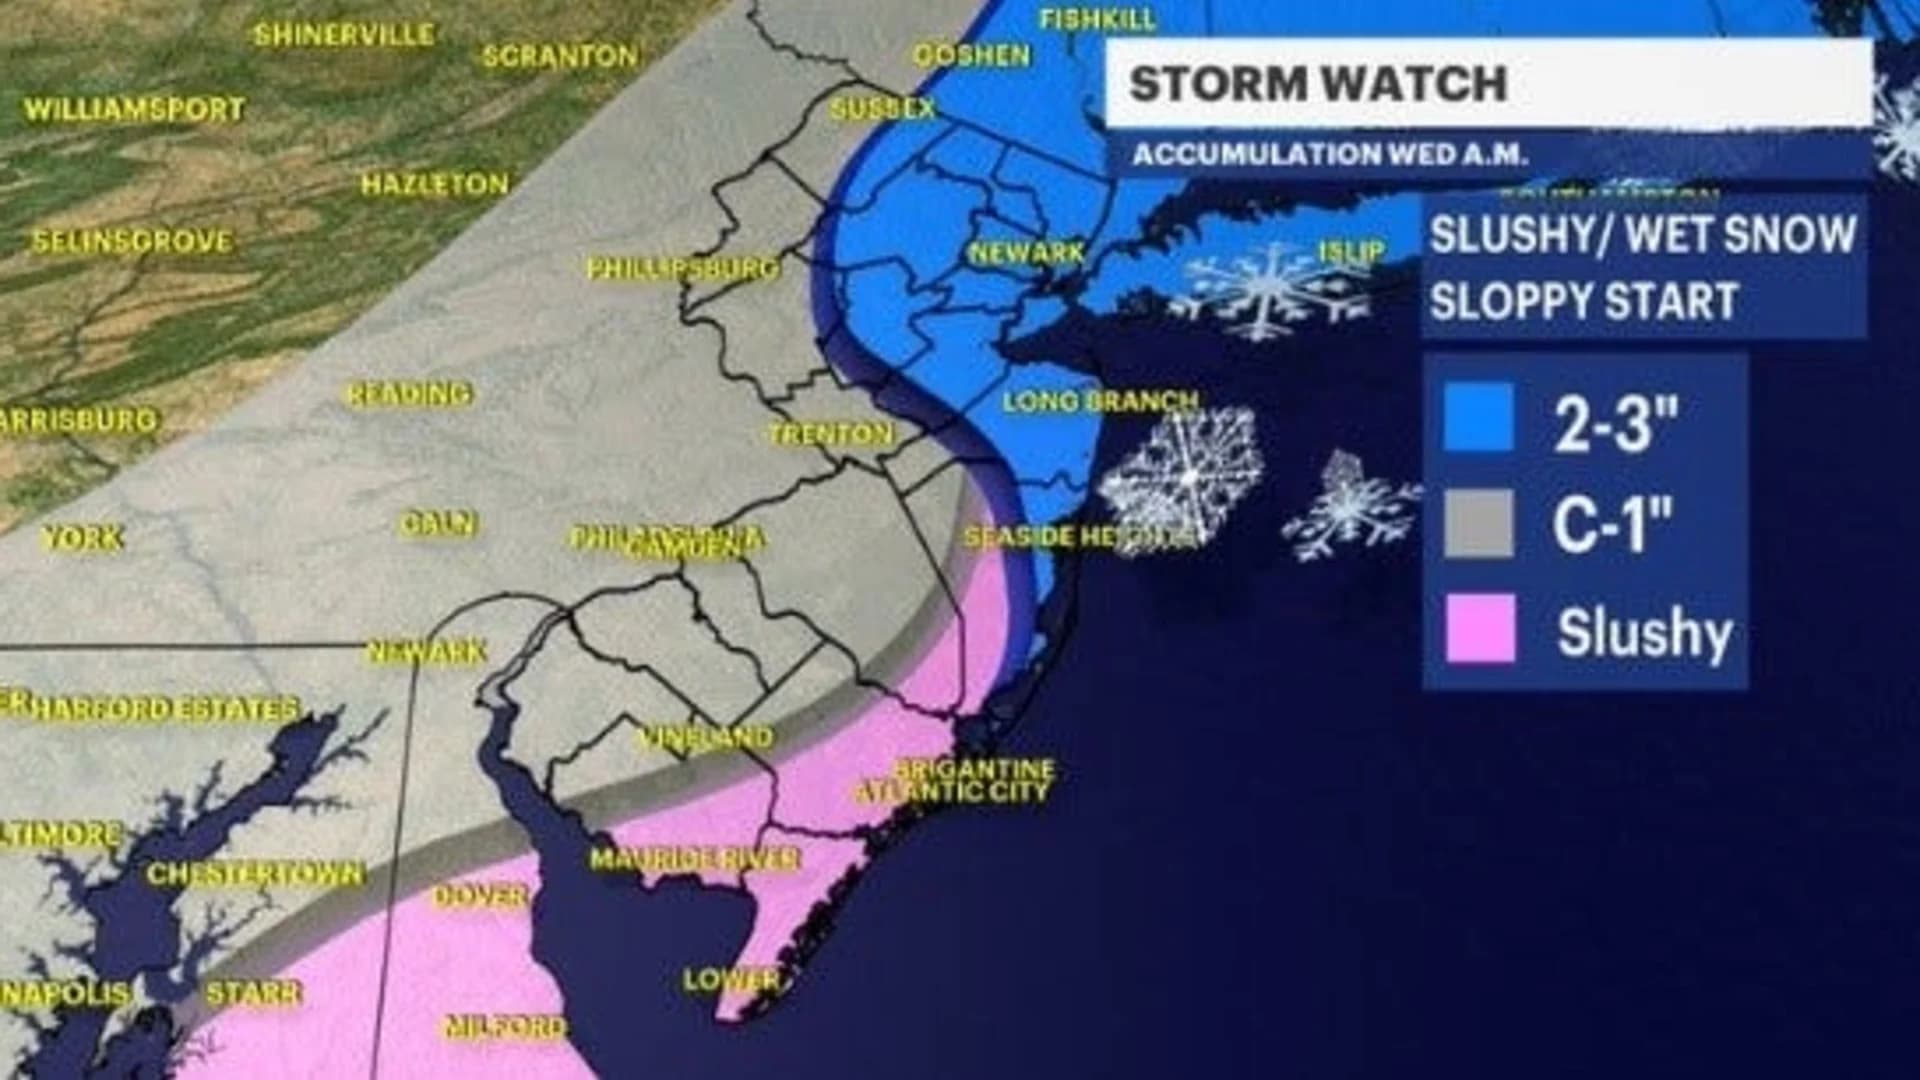 Snow falling across parts of New Jersey; messy morning commute possible